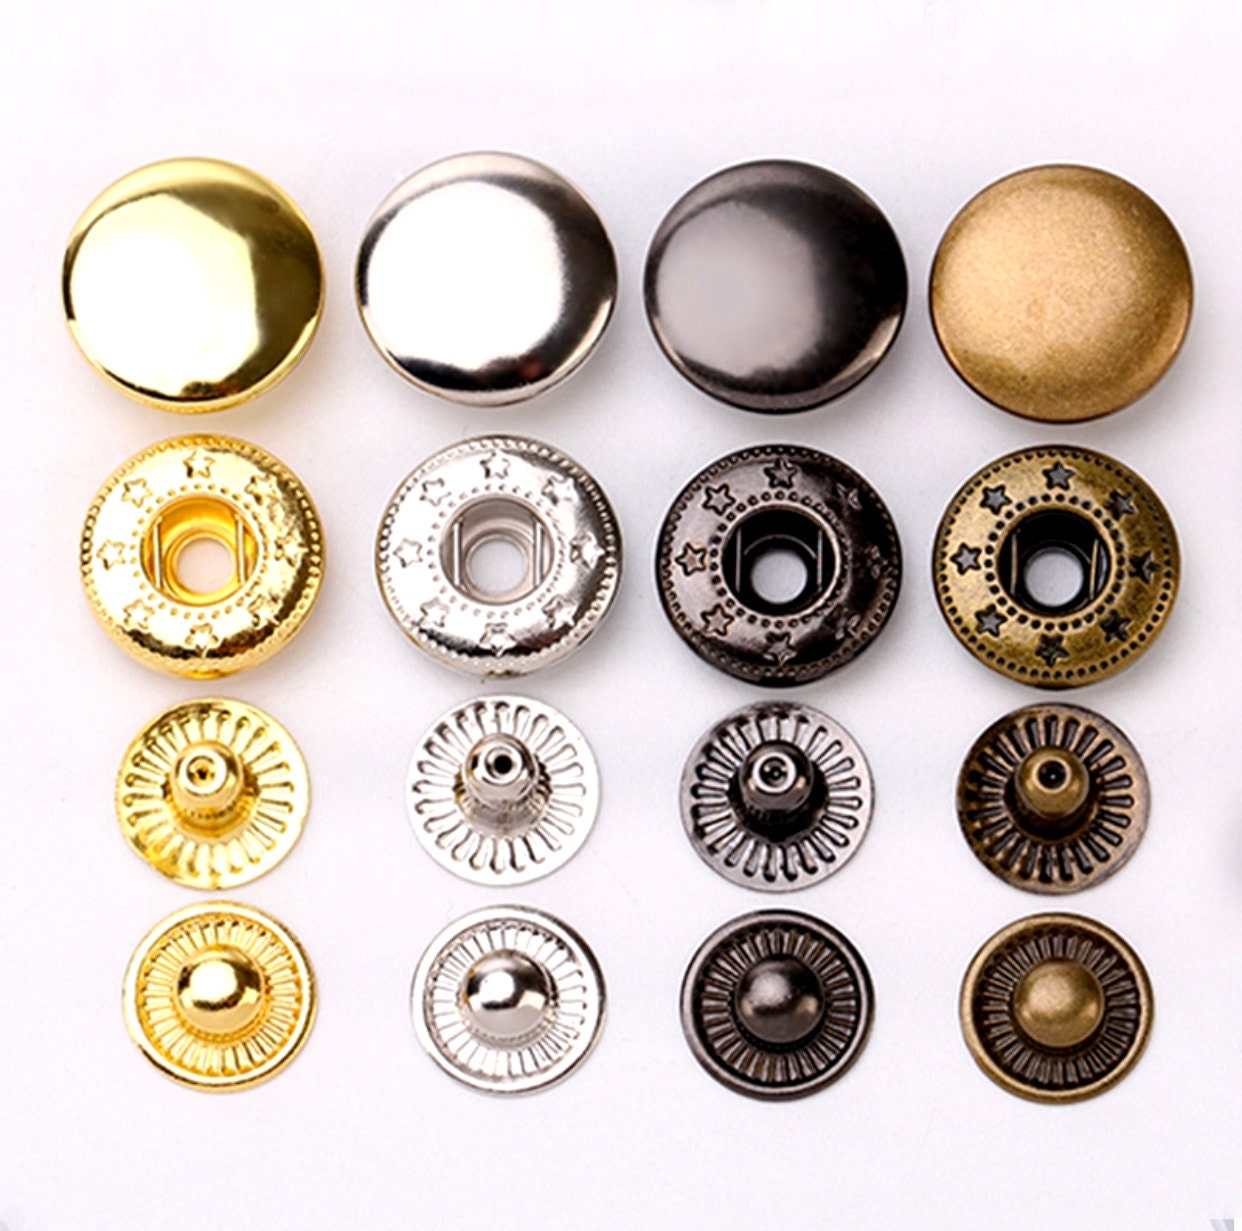 Round Metal S Spring Snap Rivet Button Fastener Closure Press Stud Popper  Tich Silver Gold Craft Leather Bag Backpack Coat Shirt Diary 